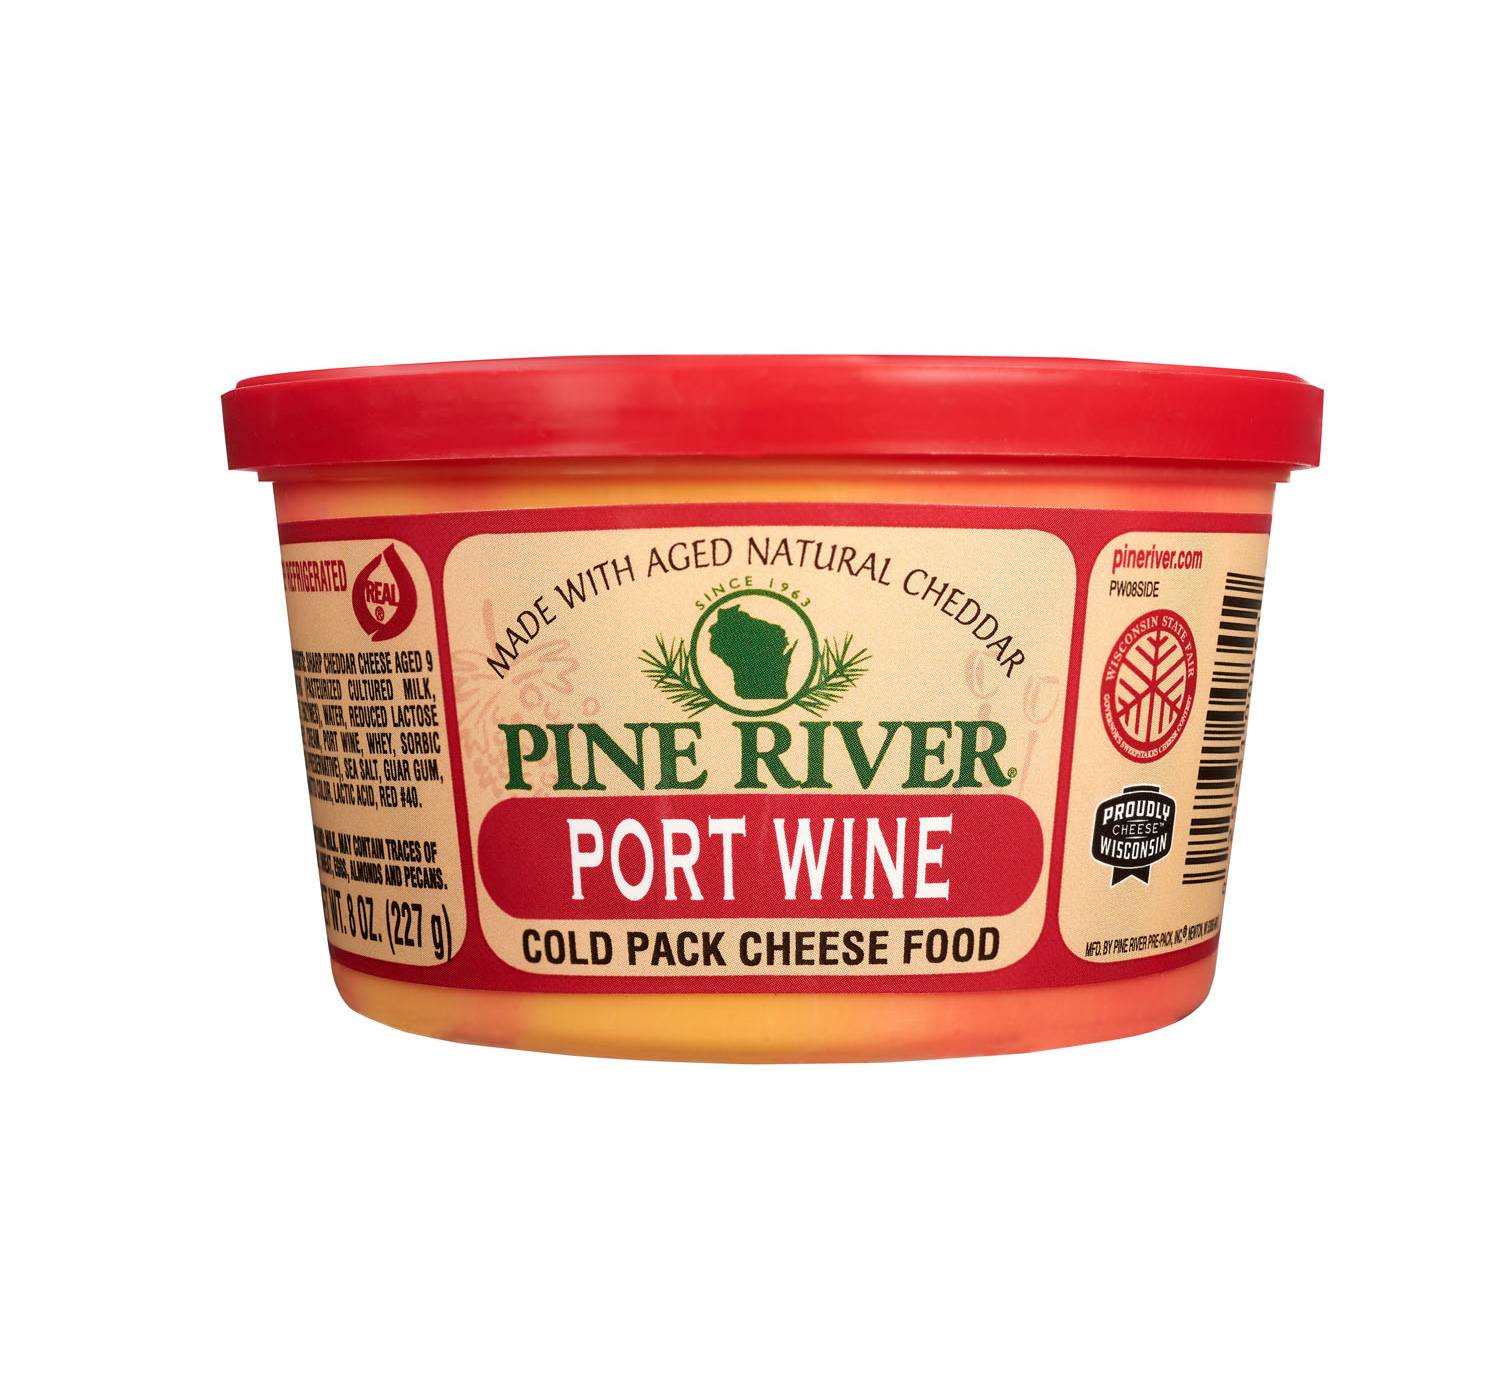 Pine River Port Wine Cheese Spread; image 1 of 3